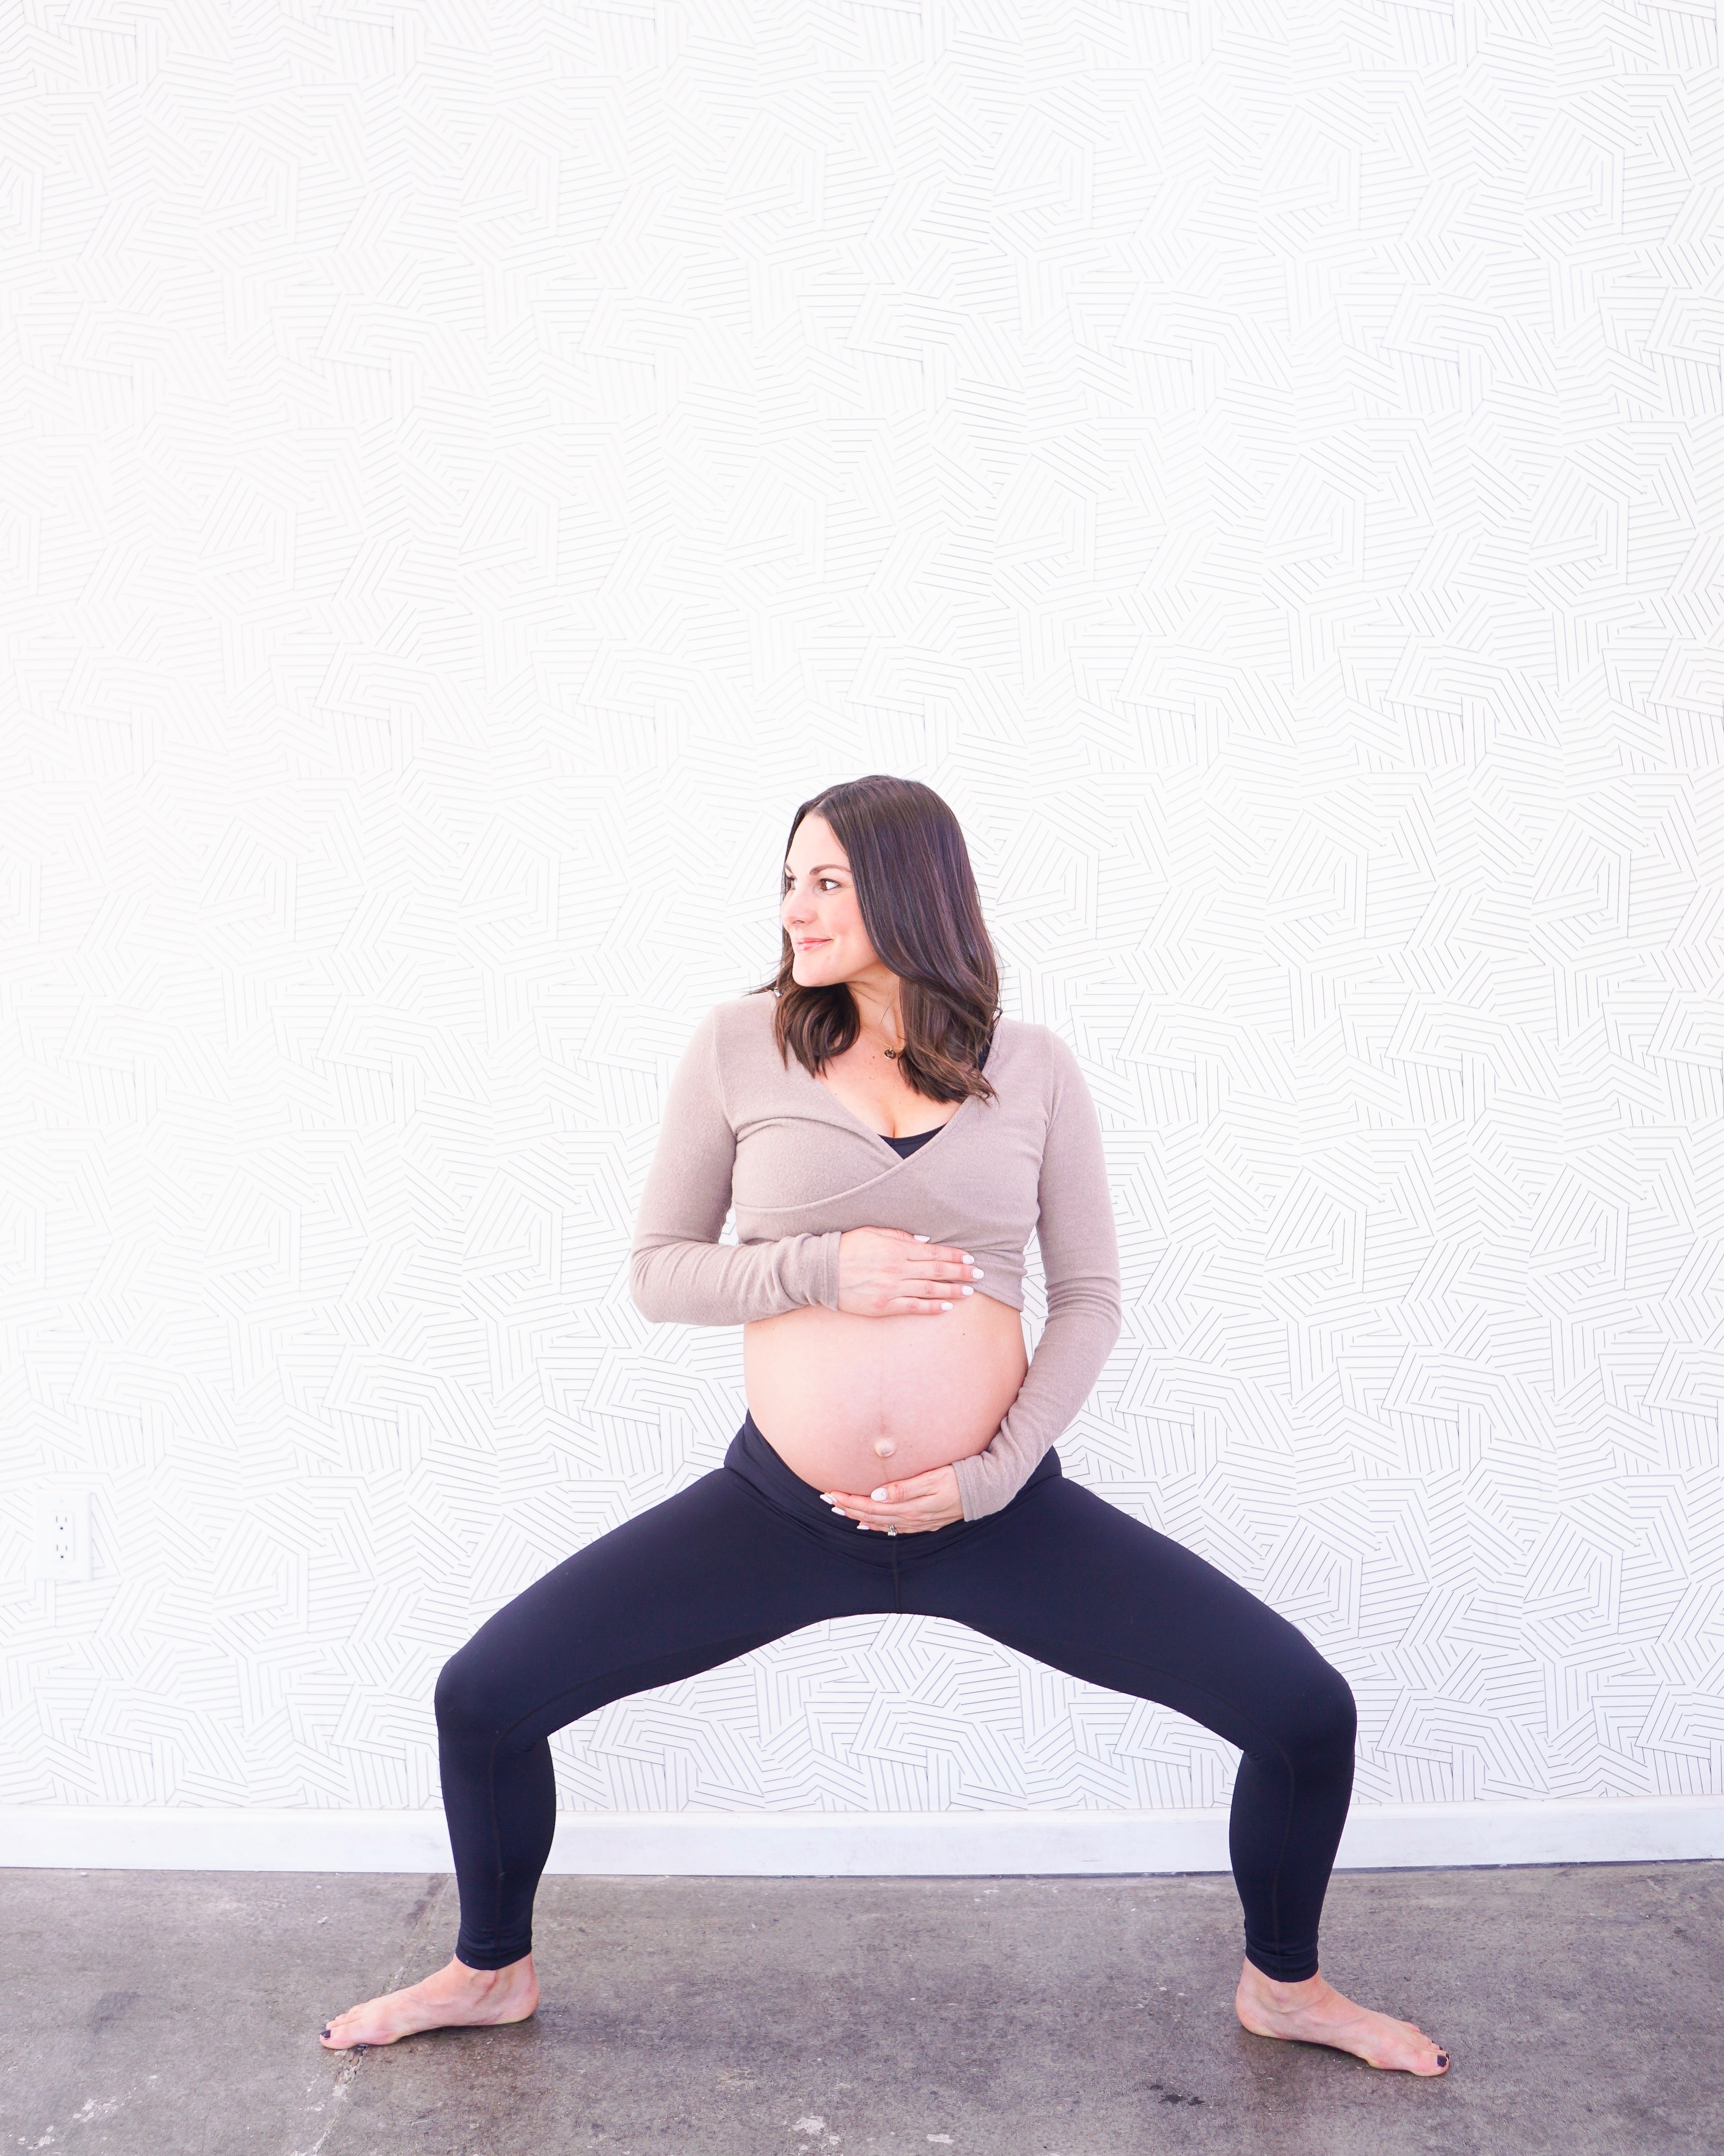 Pregnancy Yoga: Yoga Poses to Alleviate Discomfort from Pregnancy